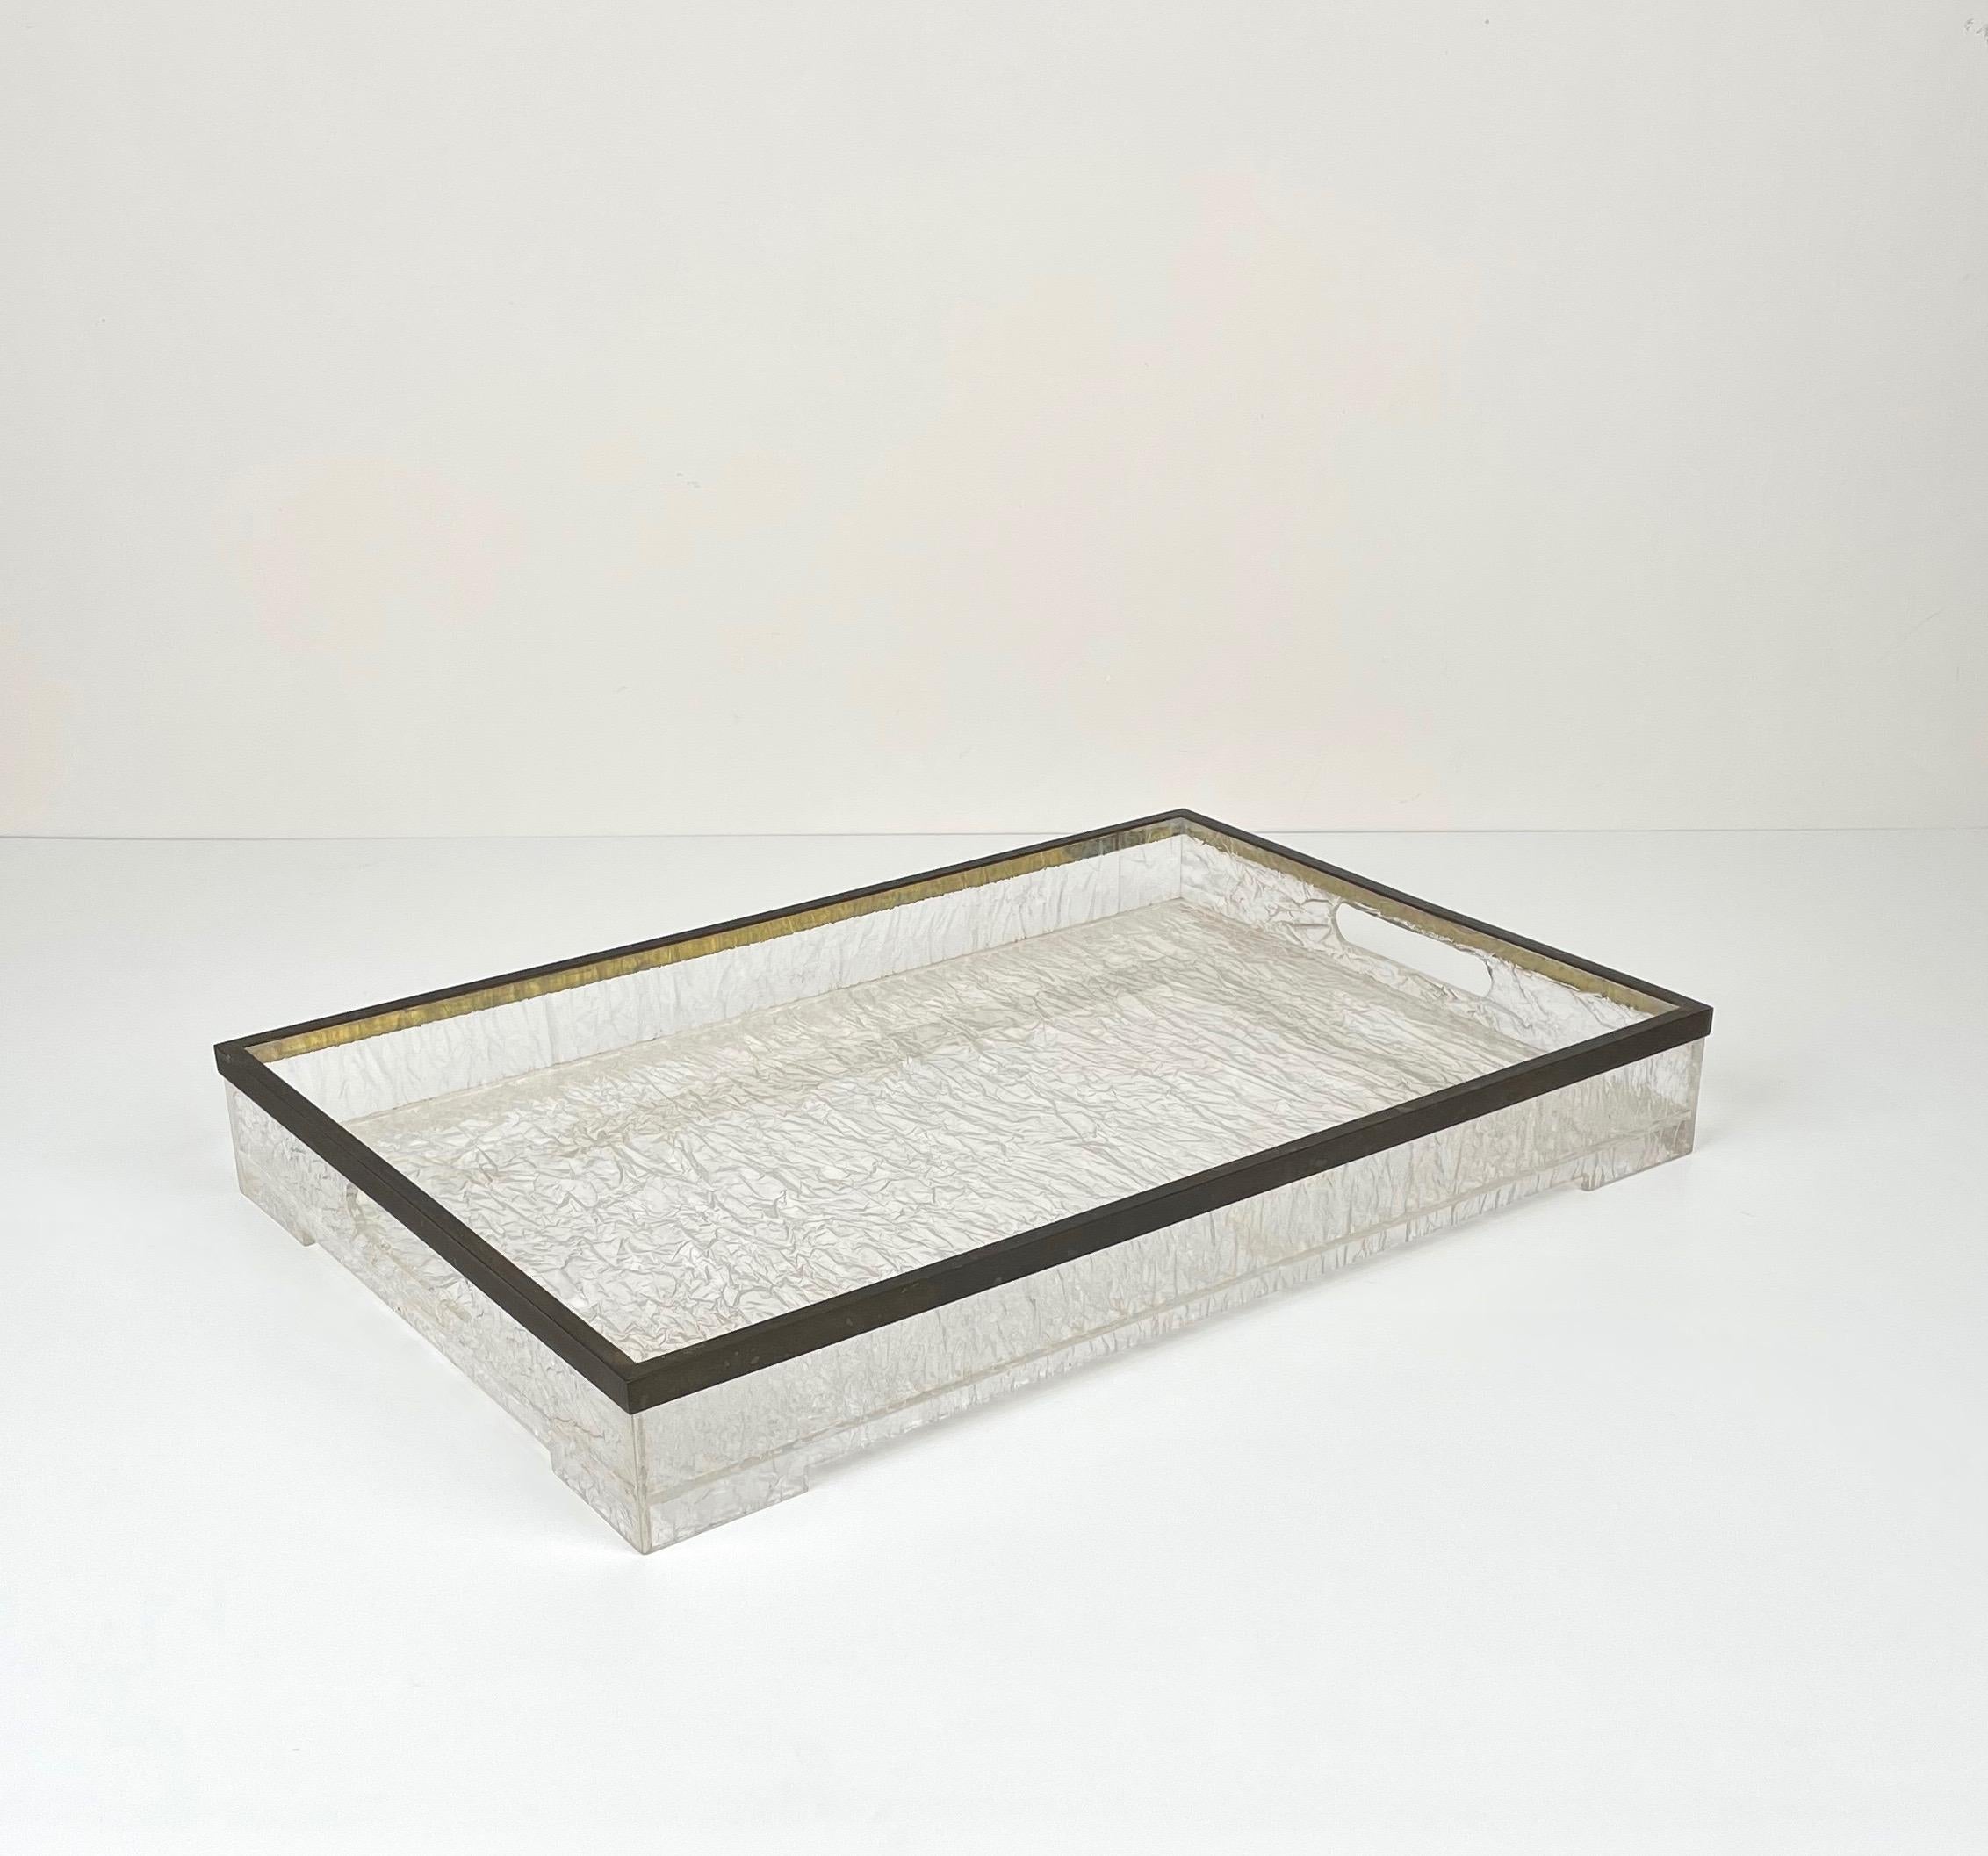 Willy Rizzo Style Serving Tray in Ice Effect Lucite and Brass, Italy, 1970s For Sale 3